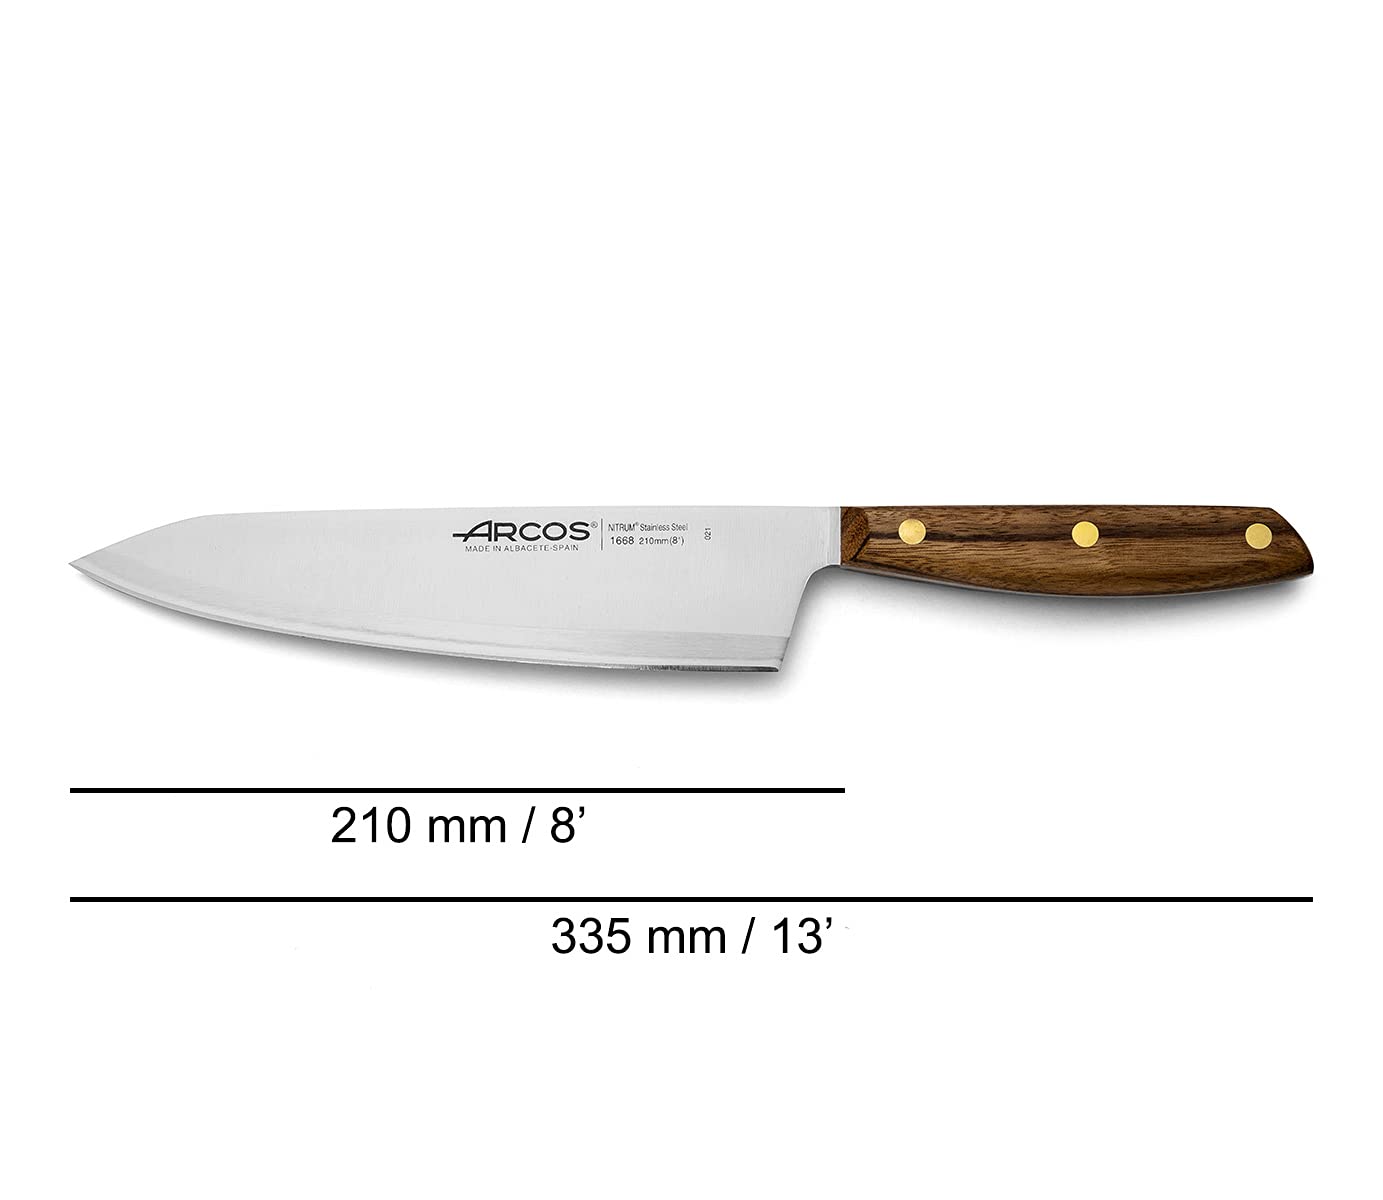 ARCOS Chef Knife 8 Inch Stainless Steel. Professional Kitchen Knife for Cooking. Ovengkol Wood Handle 100% natural FSC and 210 mm Blade. Series Nordika